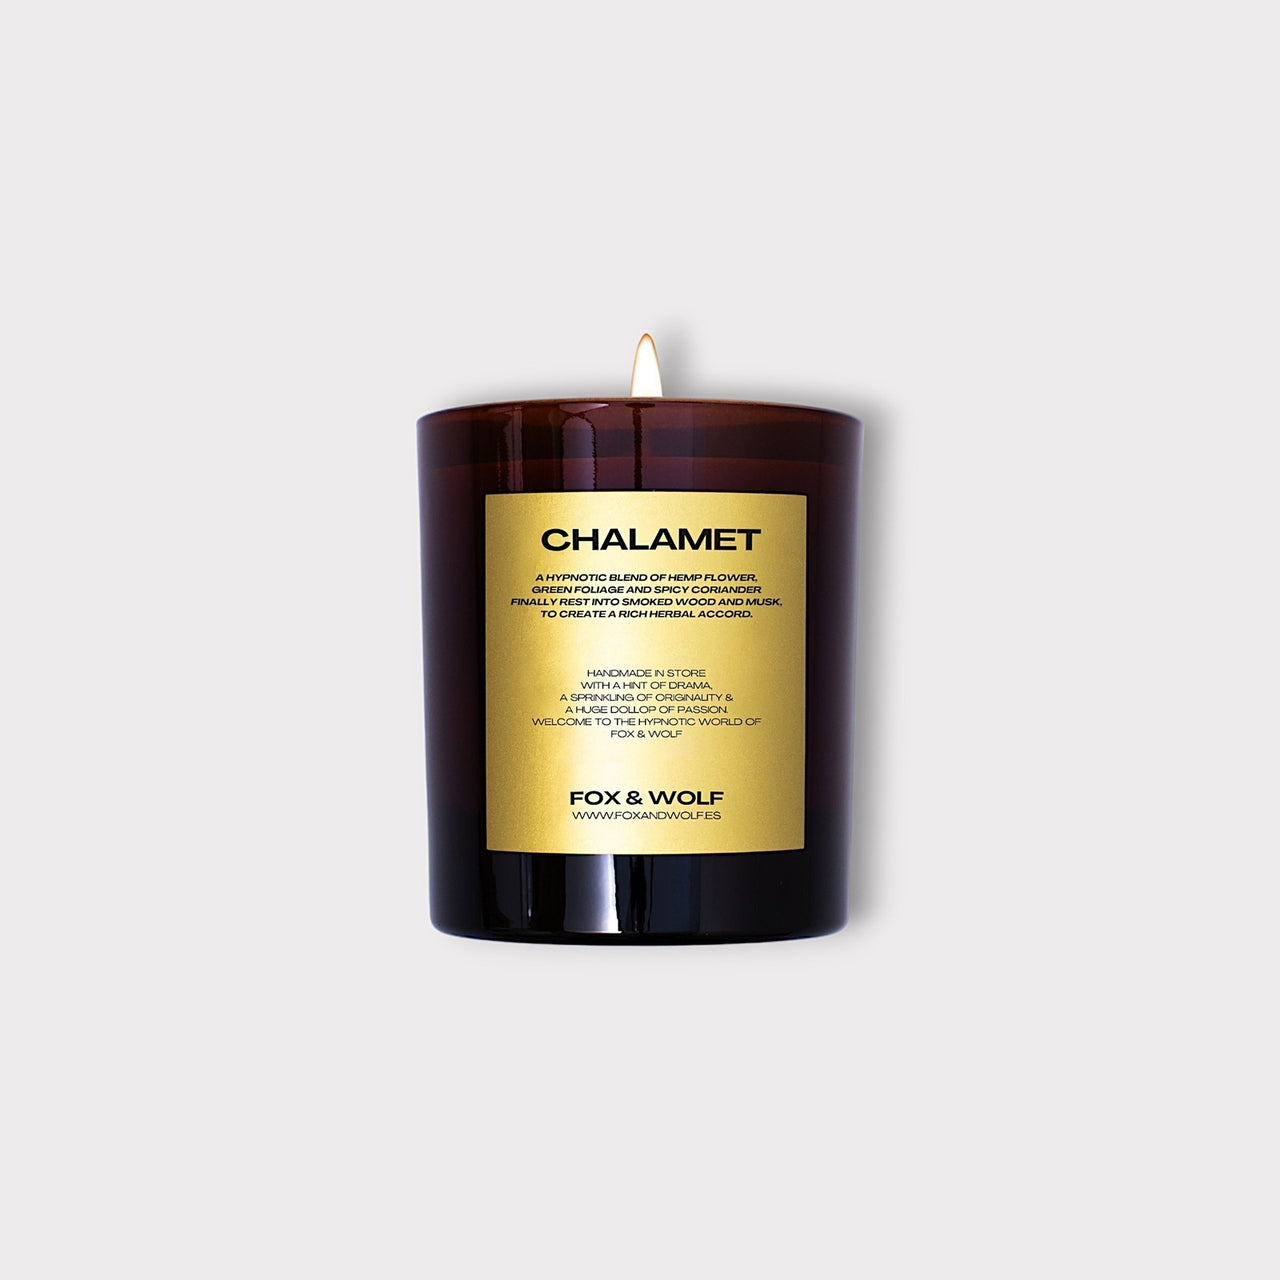 (300 G) CHALAMET SCENTED CANDLE